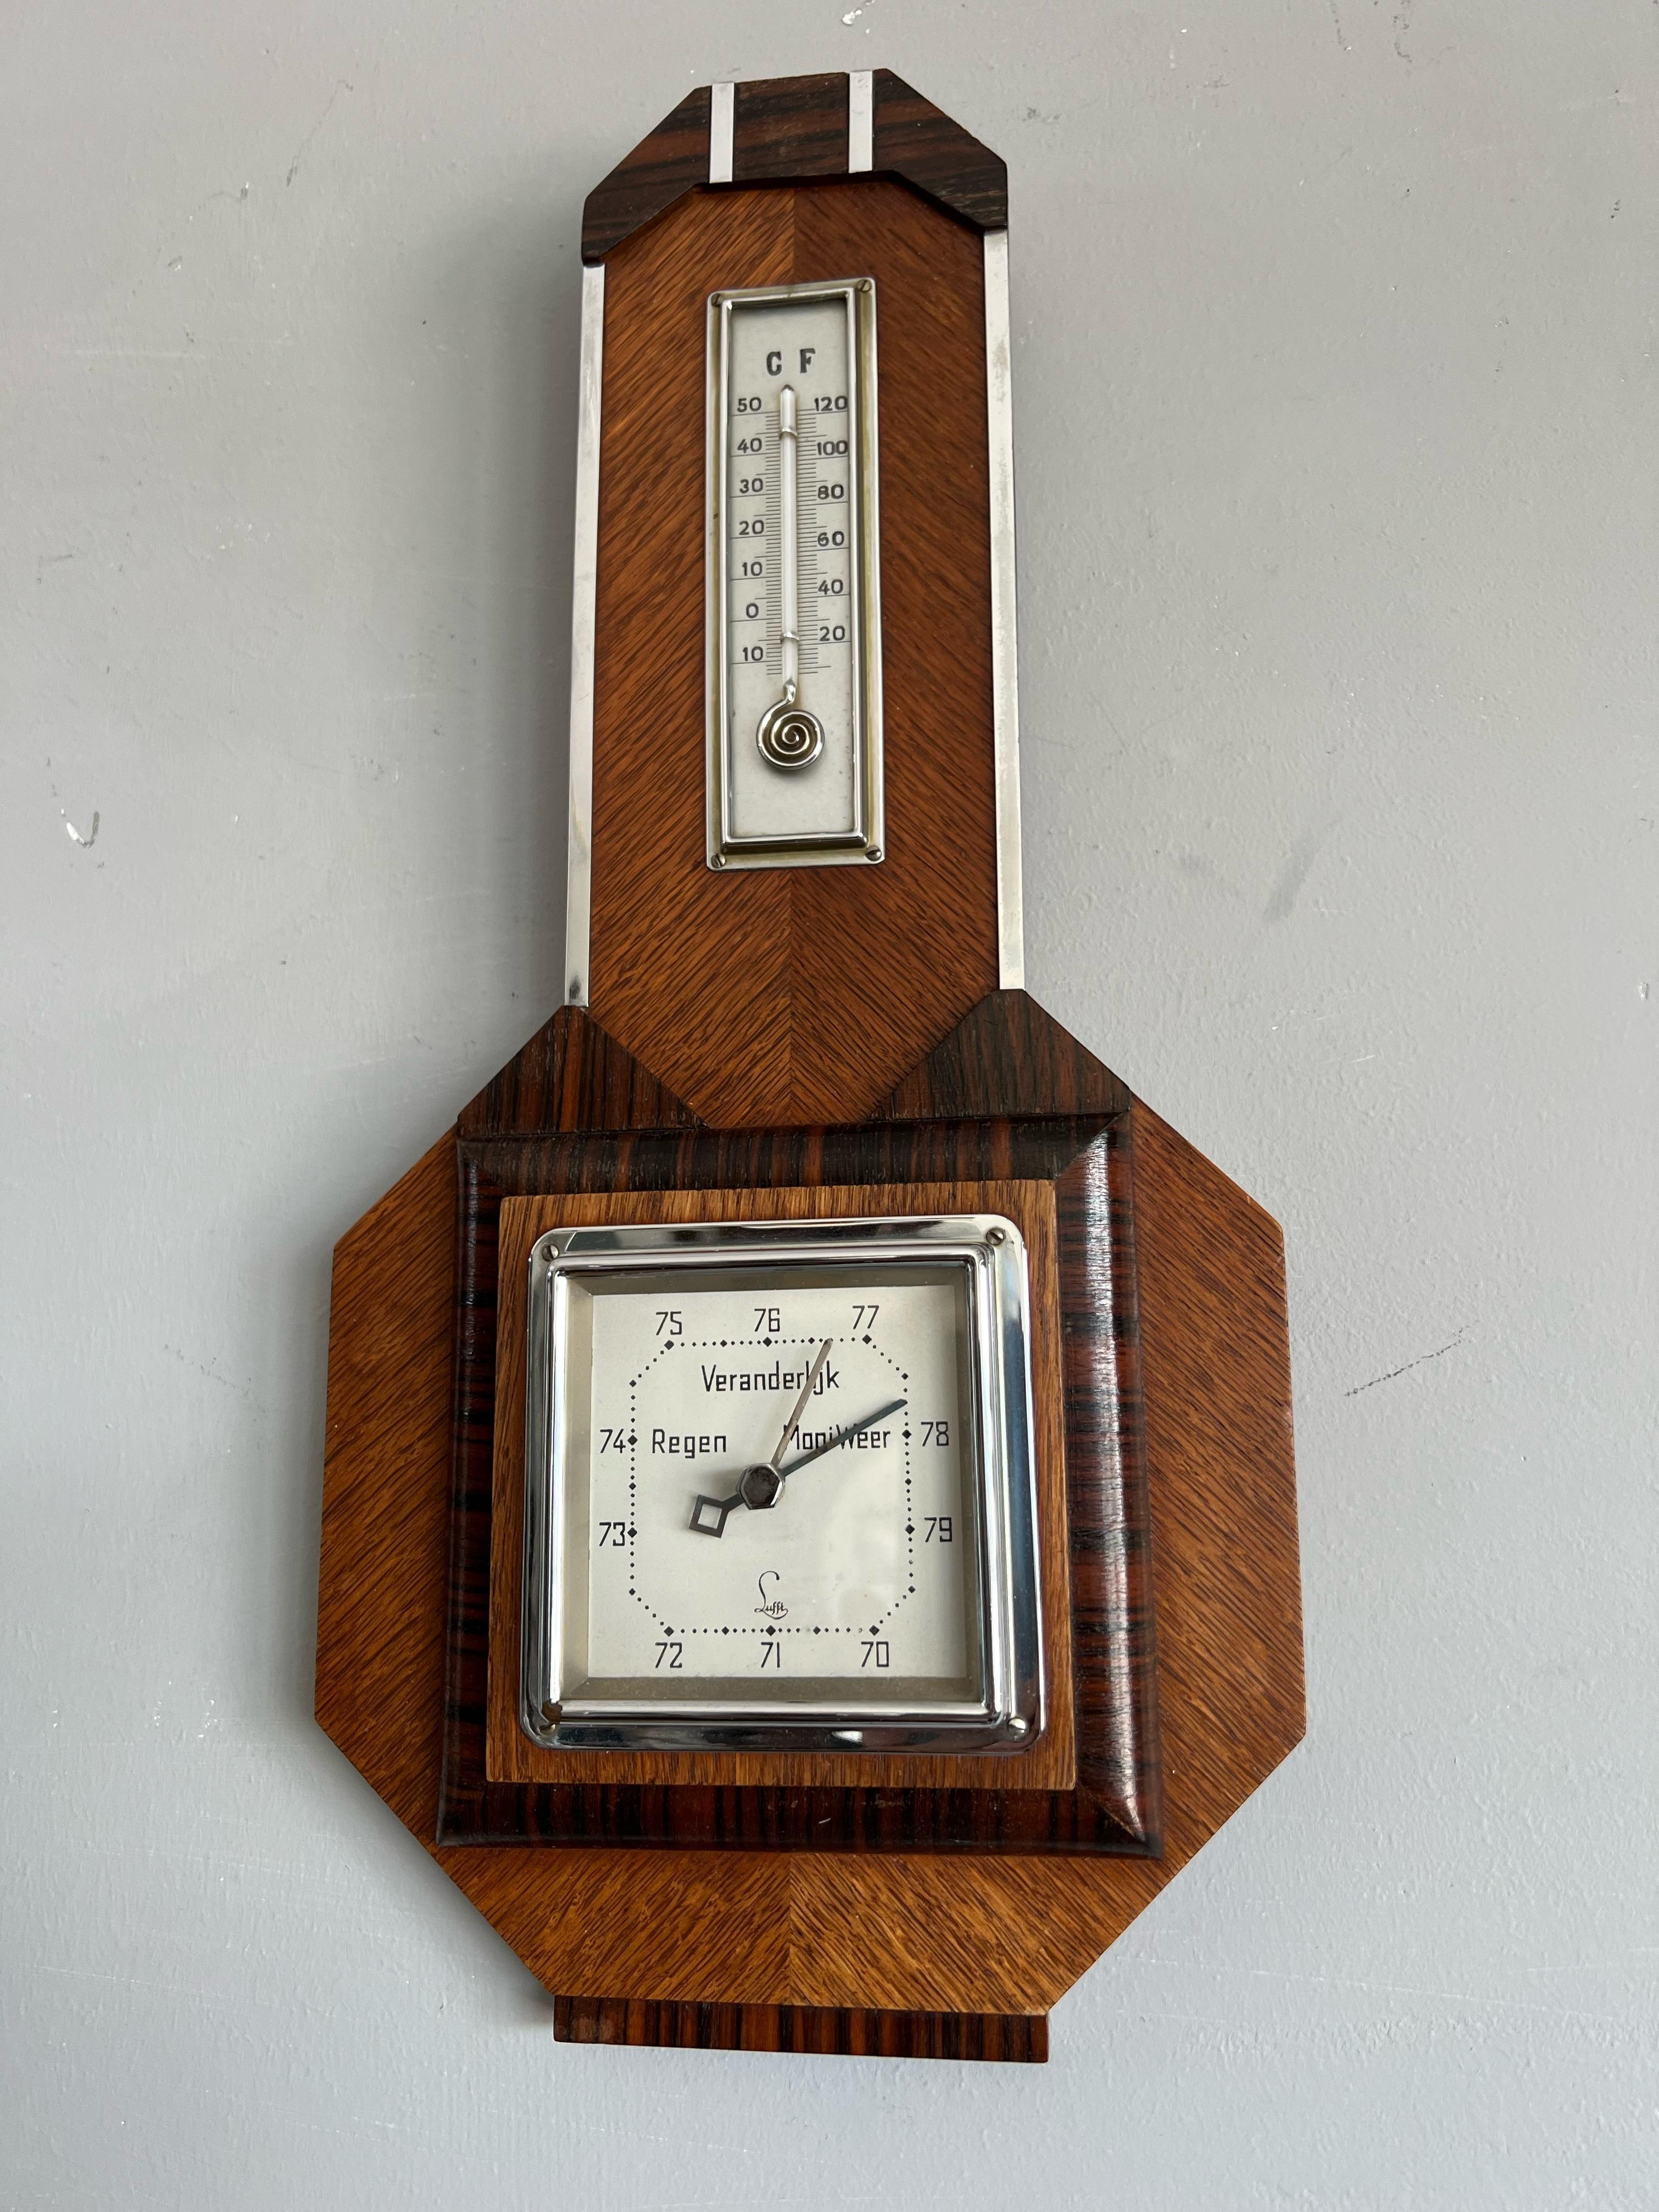 Highly stylish and marvelous design Art Deco wall barometer.

This stylish antique from the early 1900s is a dream of anyone with an Art Deco (inspired) interior. This design could not be more Art Deco and to have found a barometer with this many